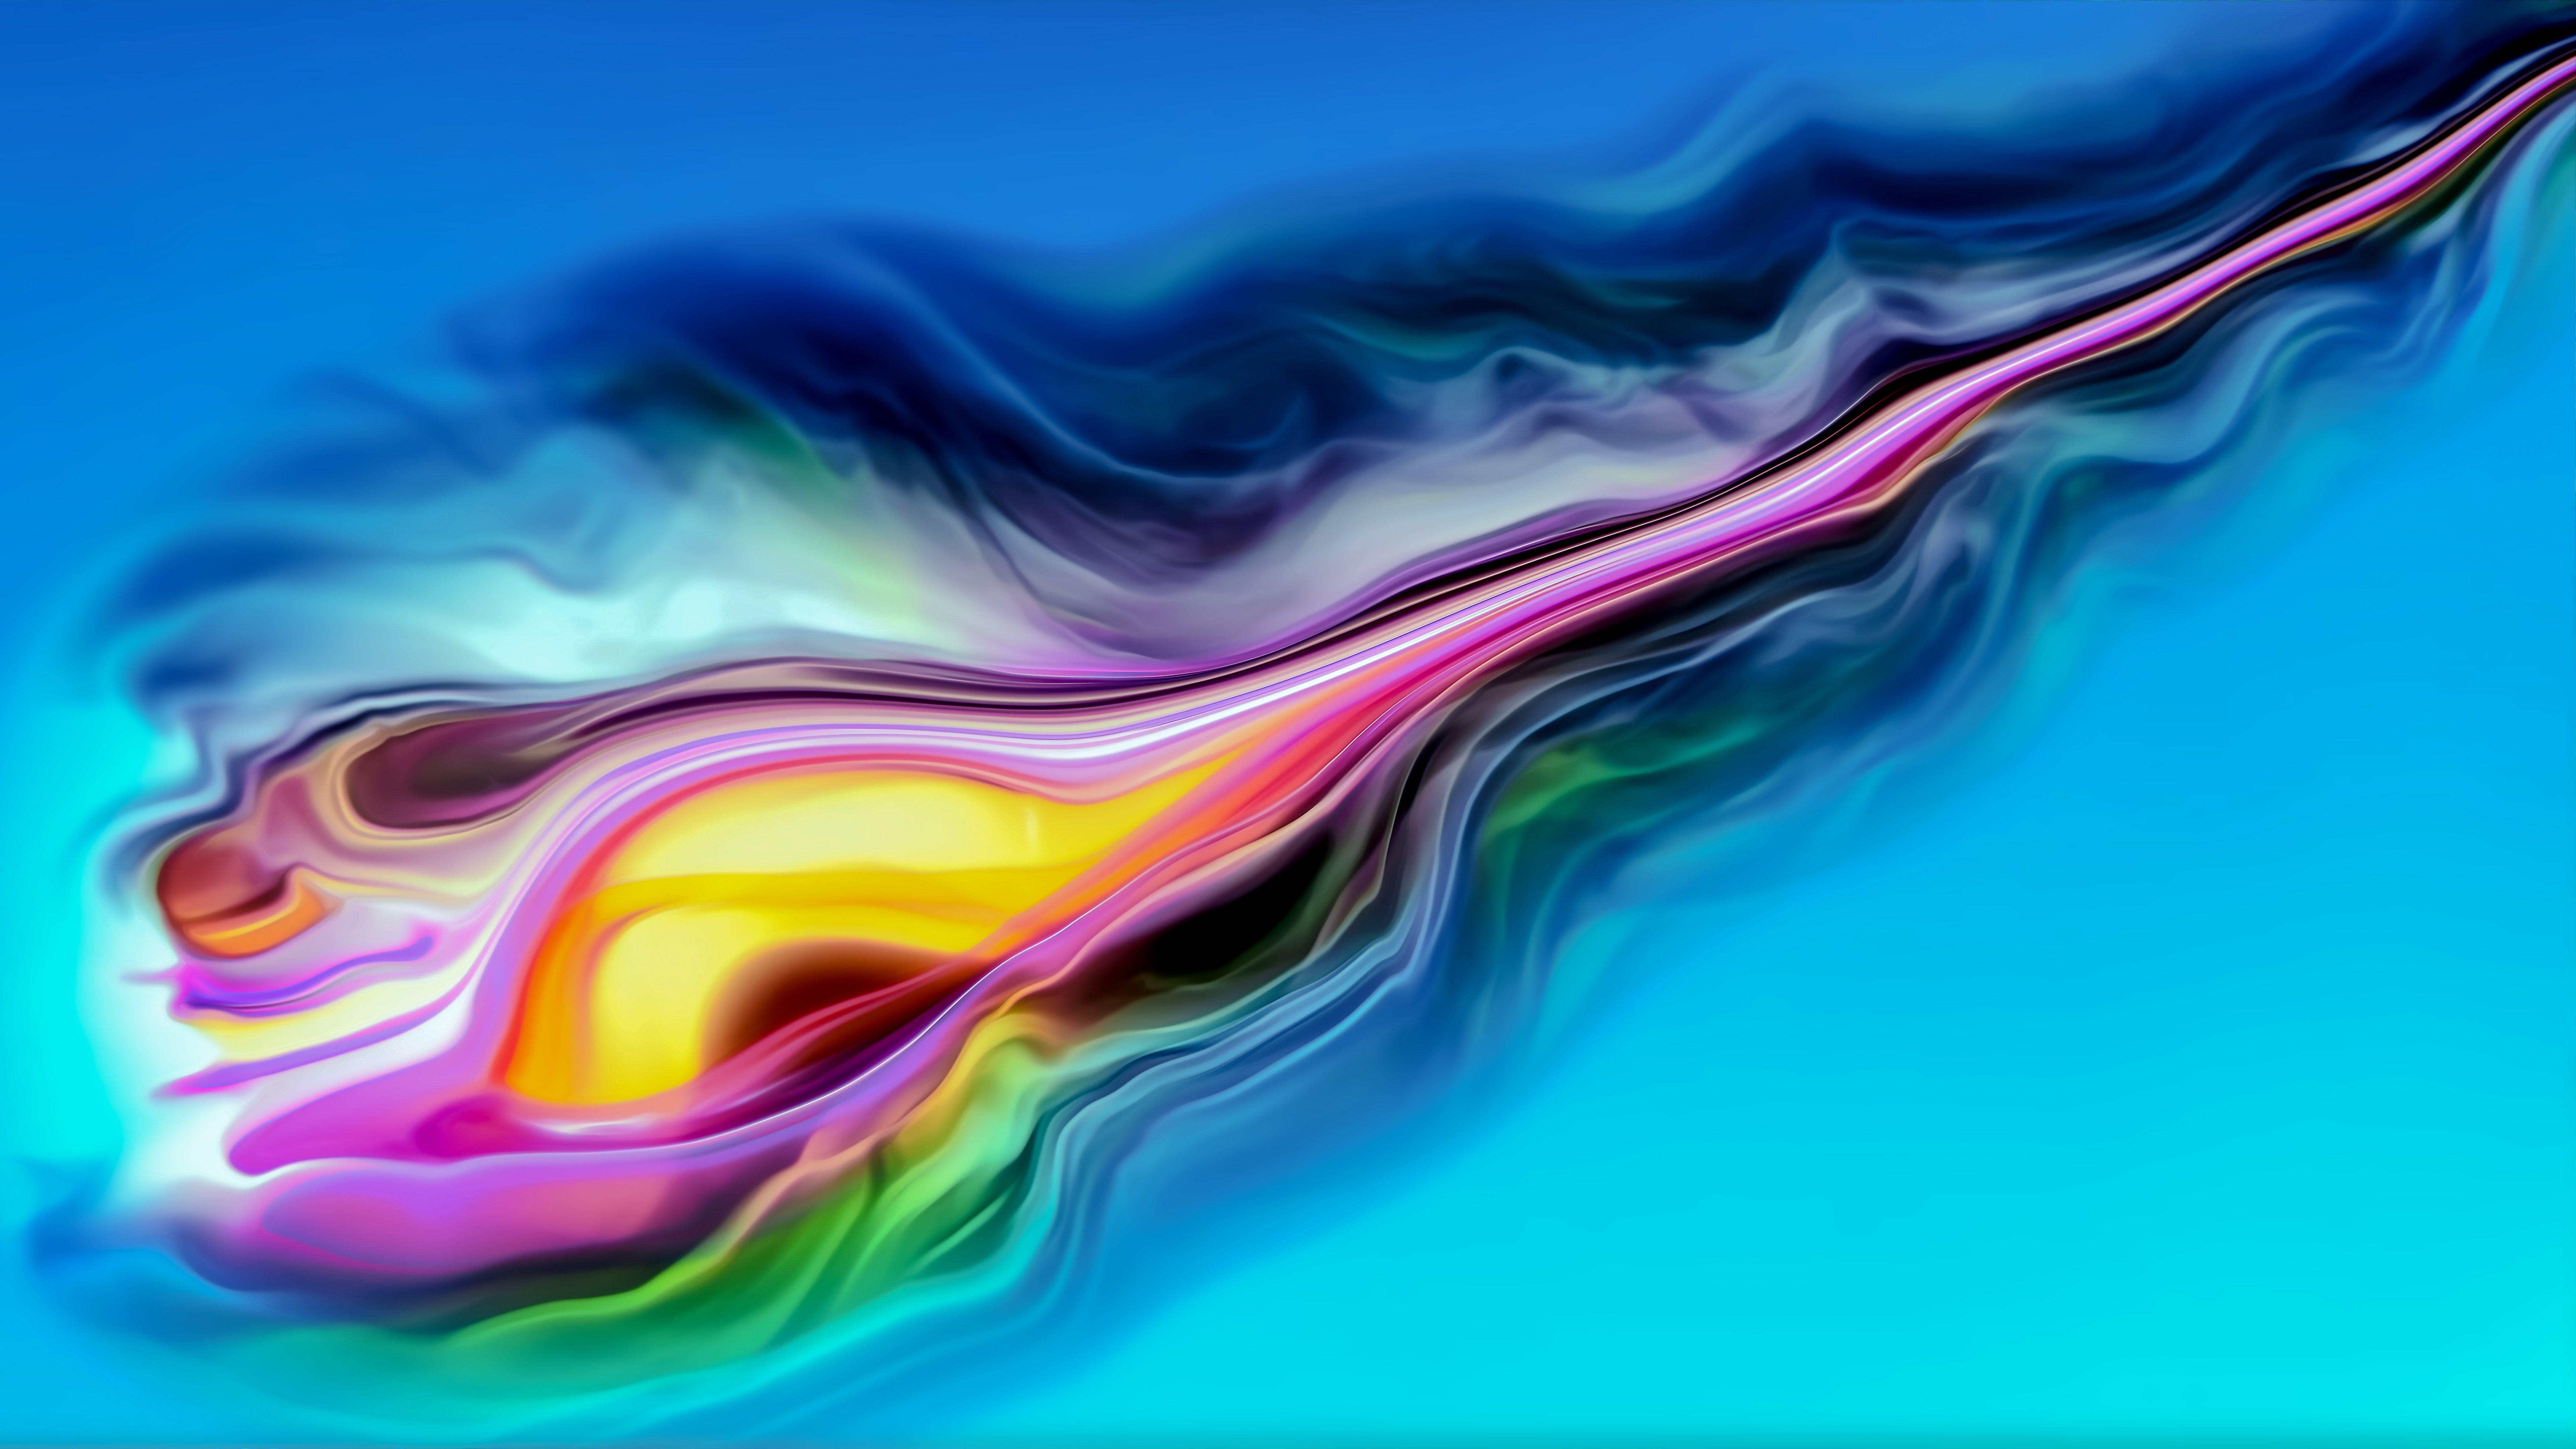 new-formation-abstract-8k-88.jpg